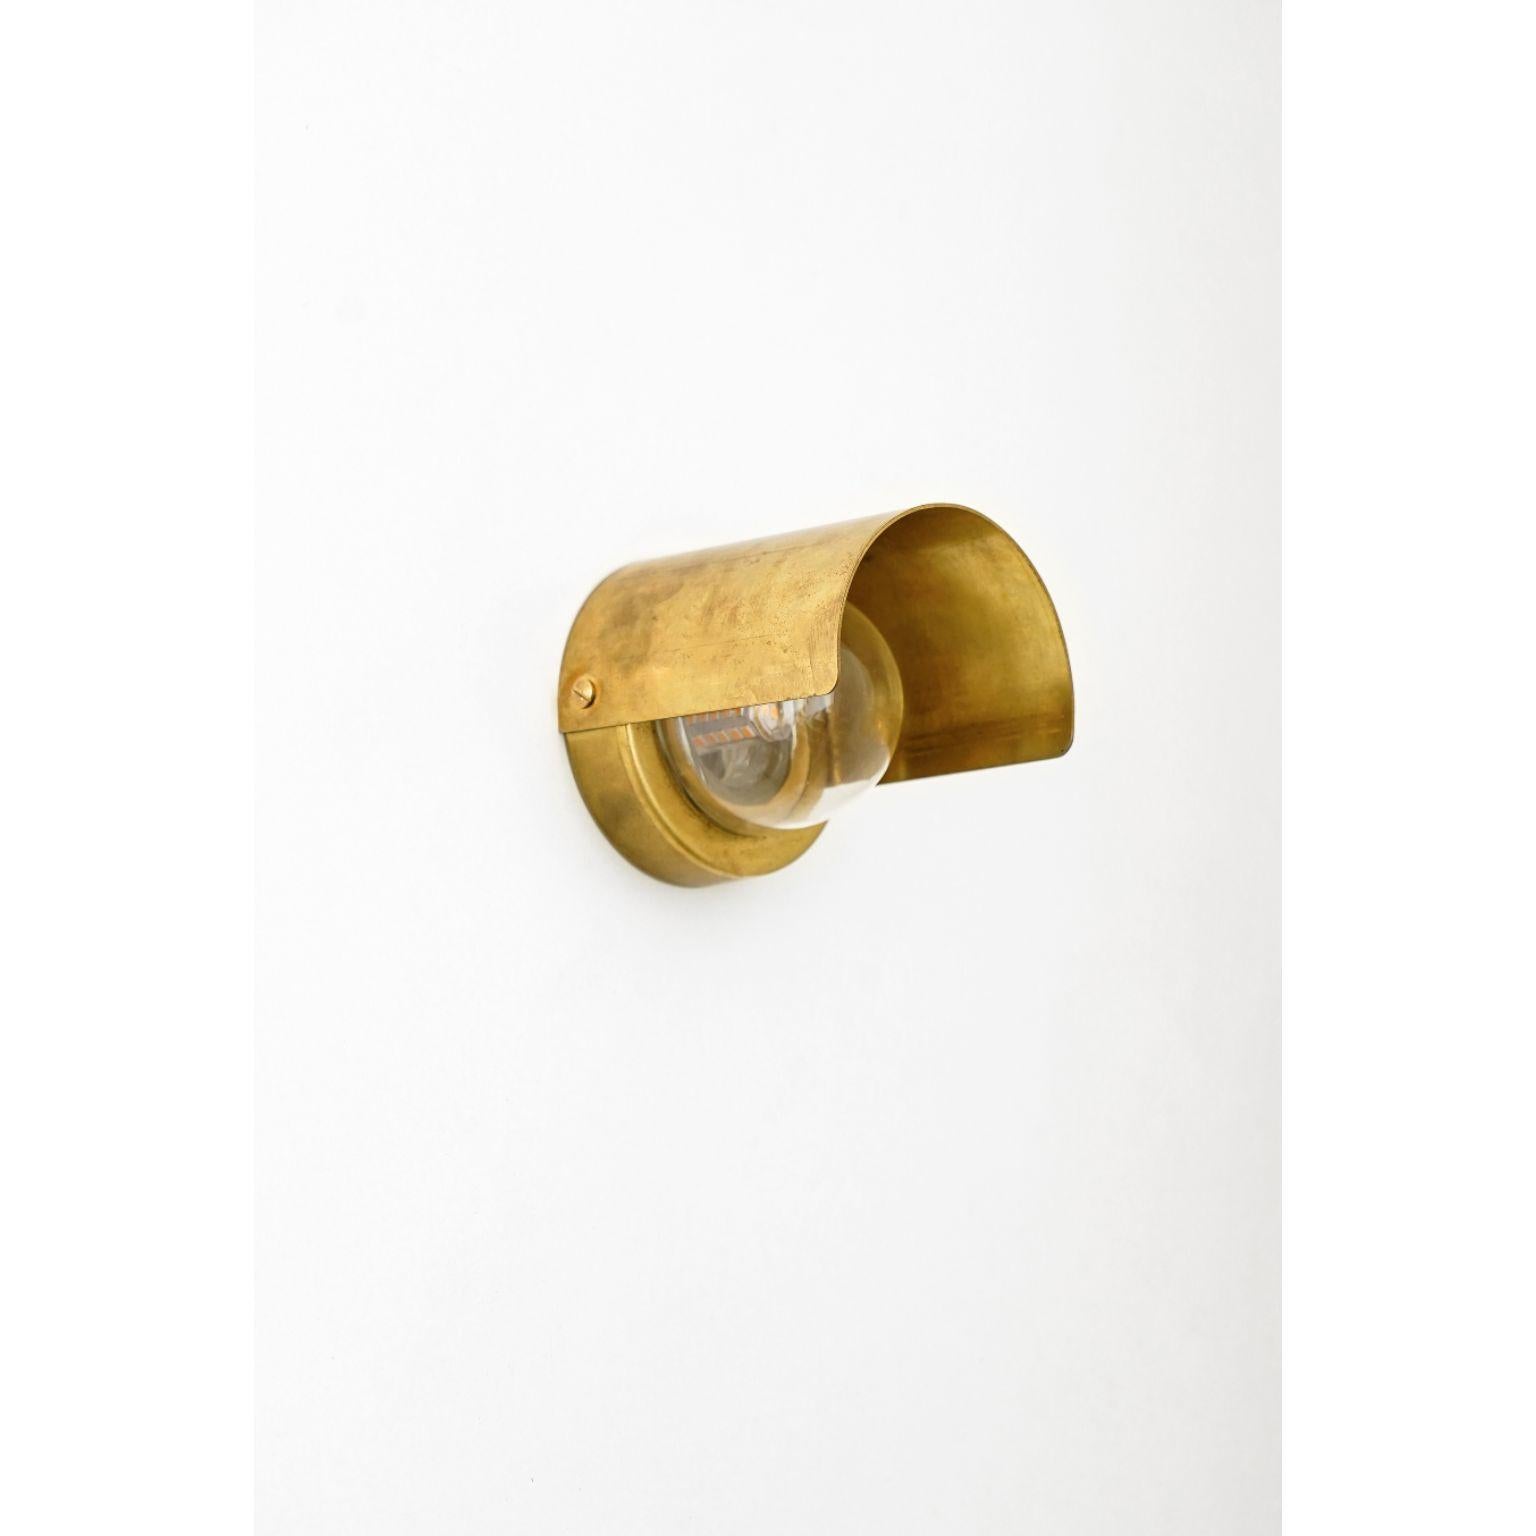 Alba Monocle wall light by Contain
Dimensions: D 8 x W 8 x H 10 cm 
Materials: Brass, 3D printed PLA structure and optical lens.
Available in different finishes, Universal box required for installation / indoor and outdoor.

All our lamps can